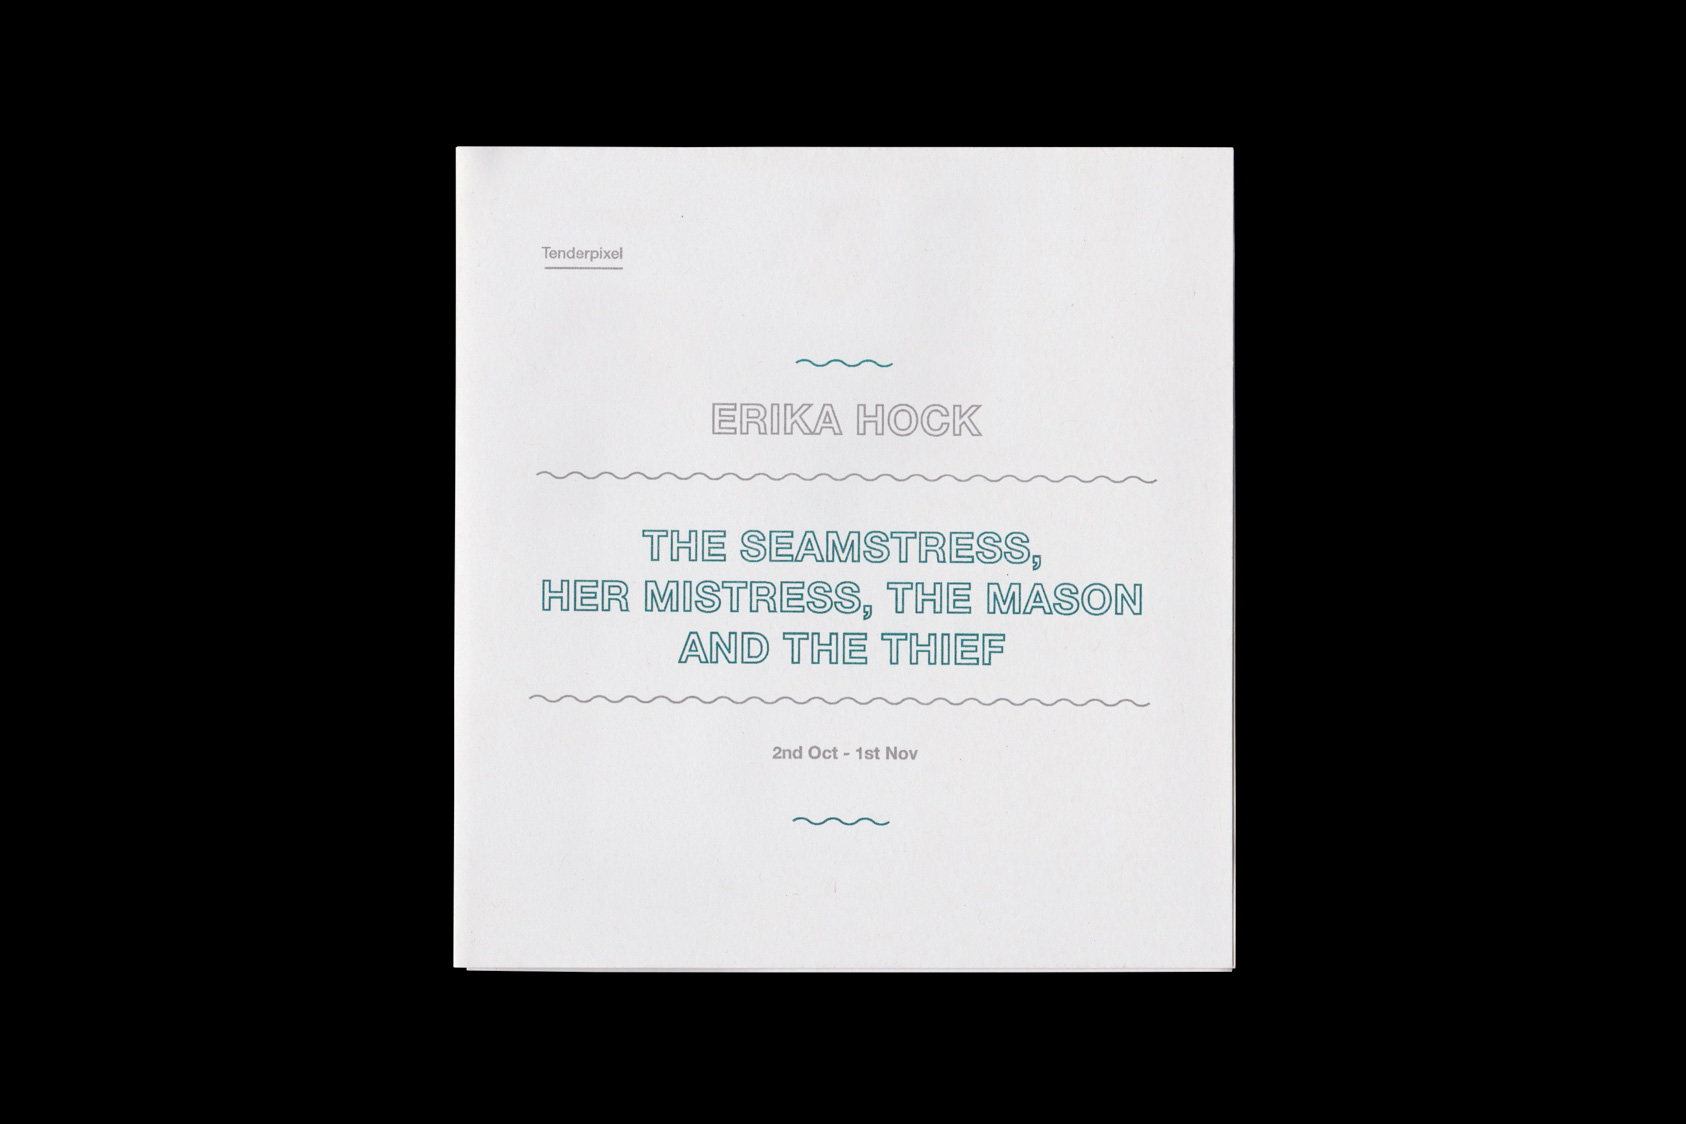 The Seamstress, Her Mistress, The Mason, and The Thief - exhibition handout for Tenderpixel, 2014 by the agency for emerging ideas